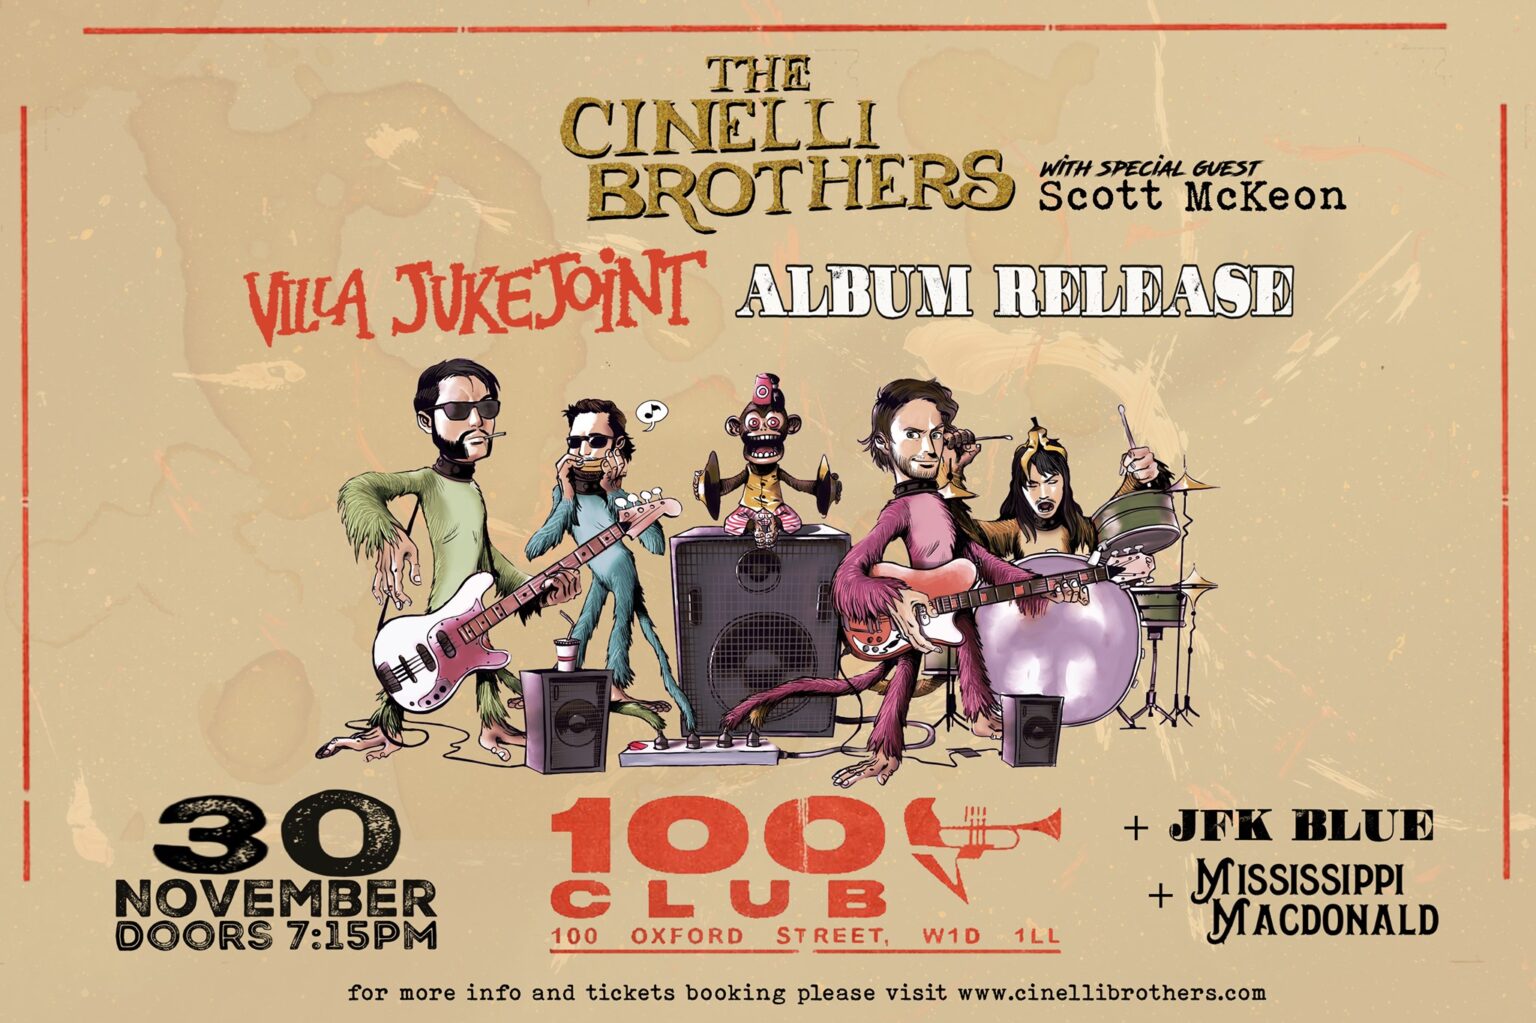 THE 100 CLUB | TUESDAY BLUES: THE CINELLI BROTHERS